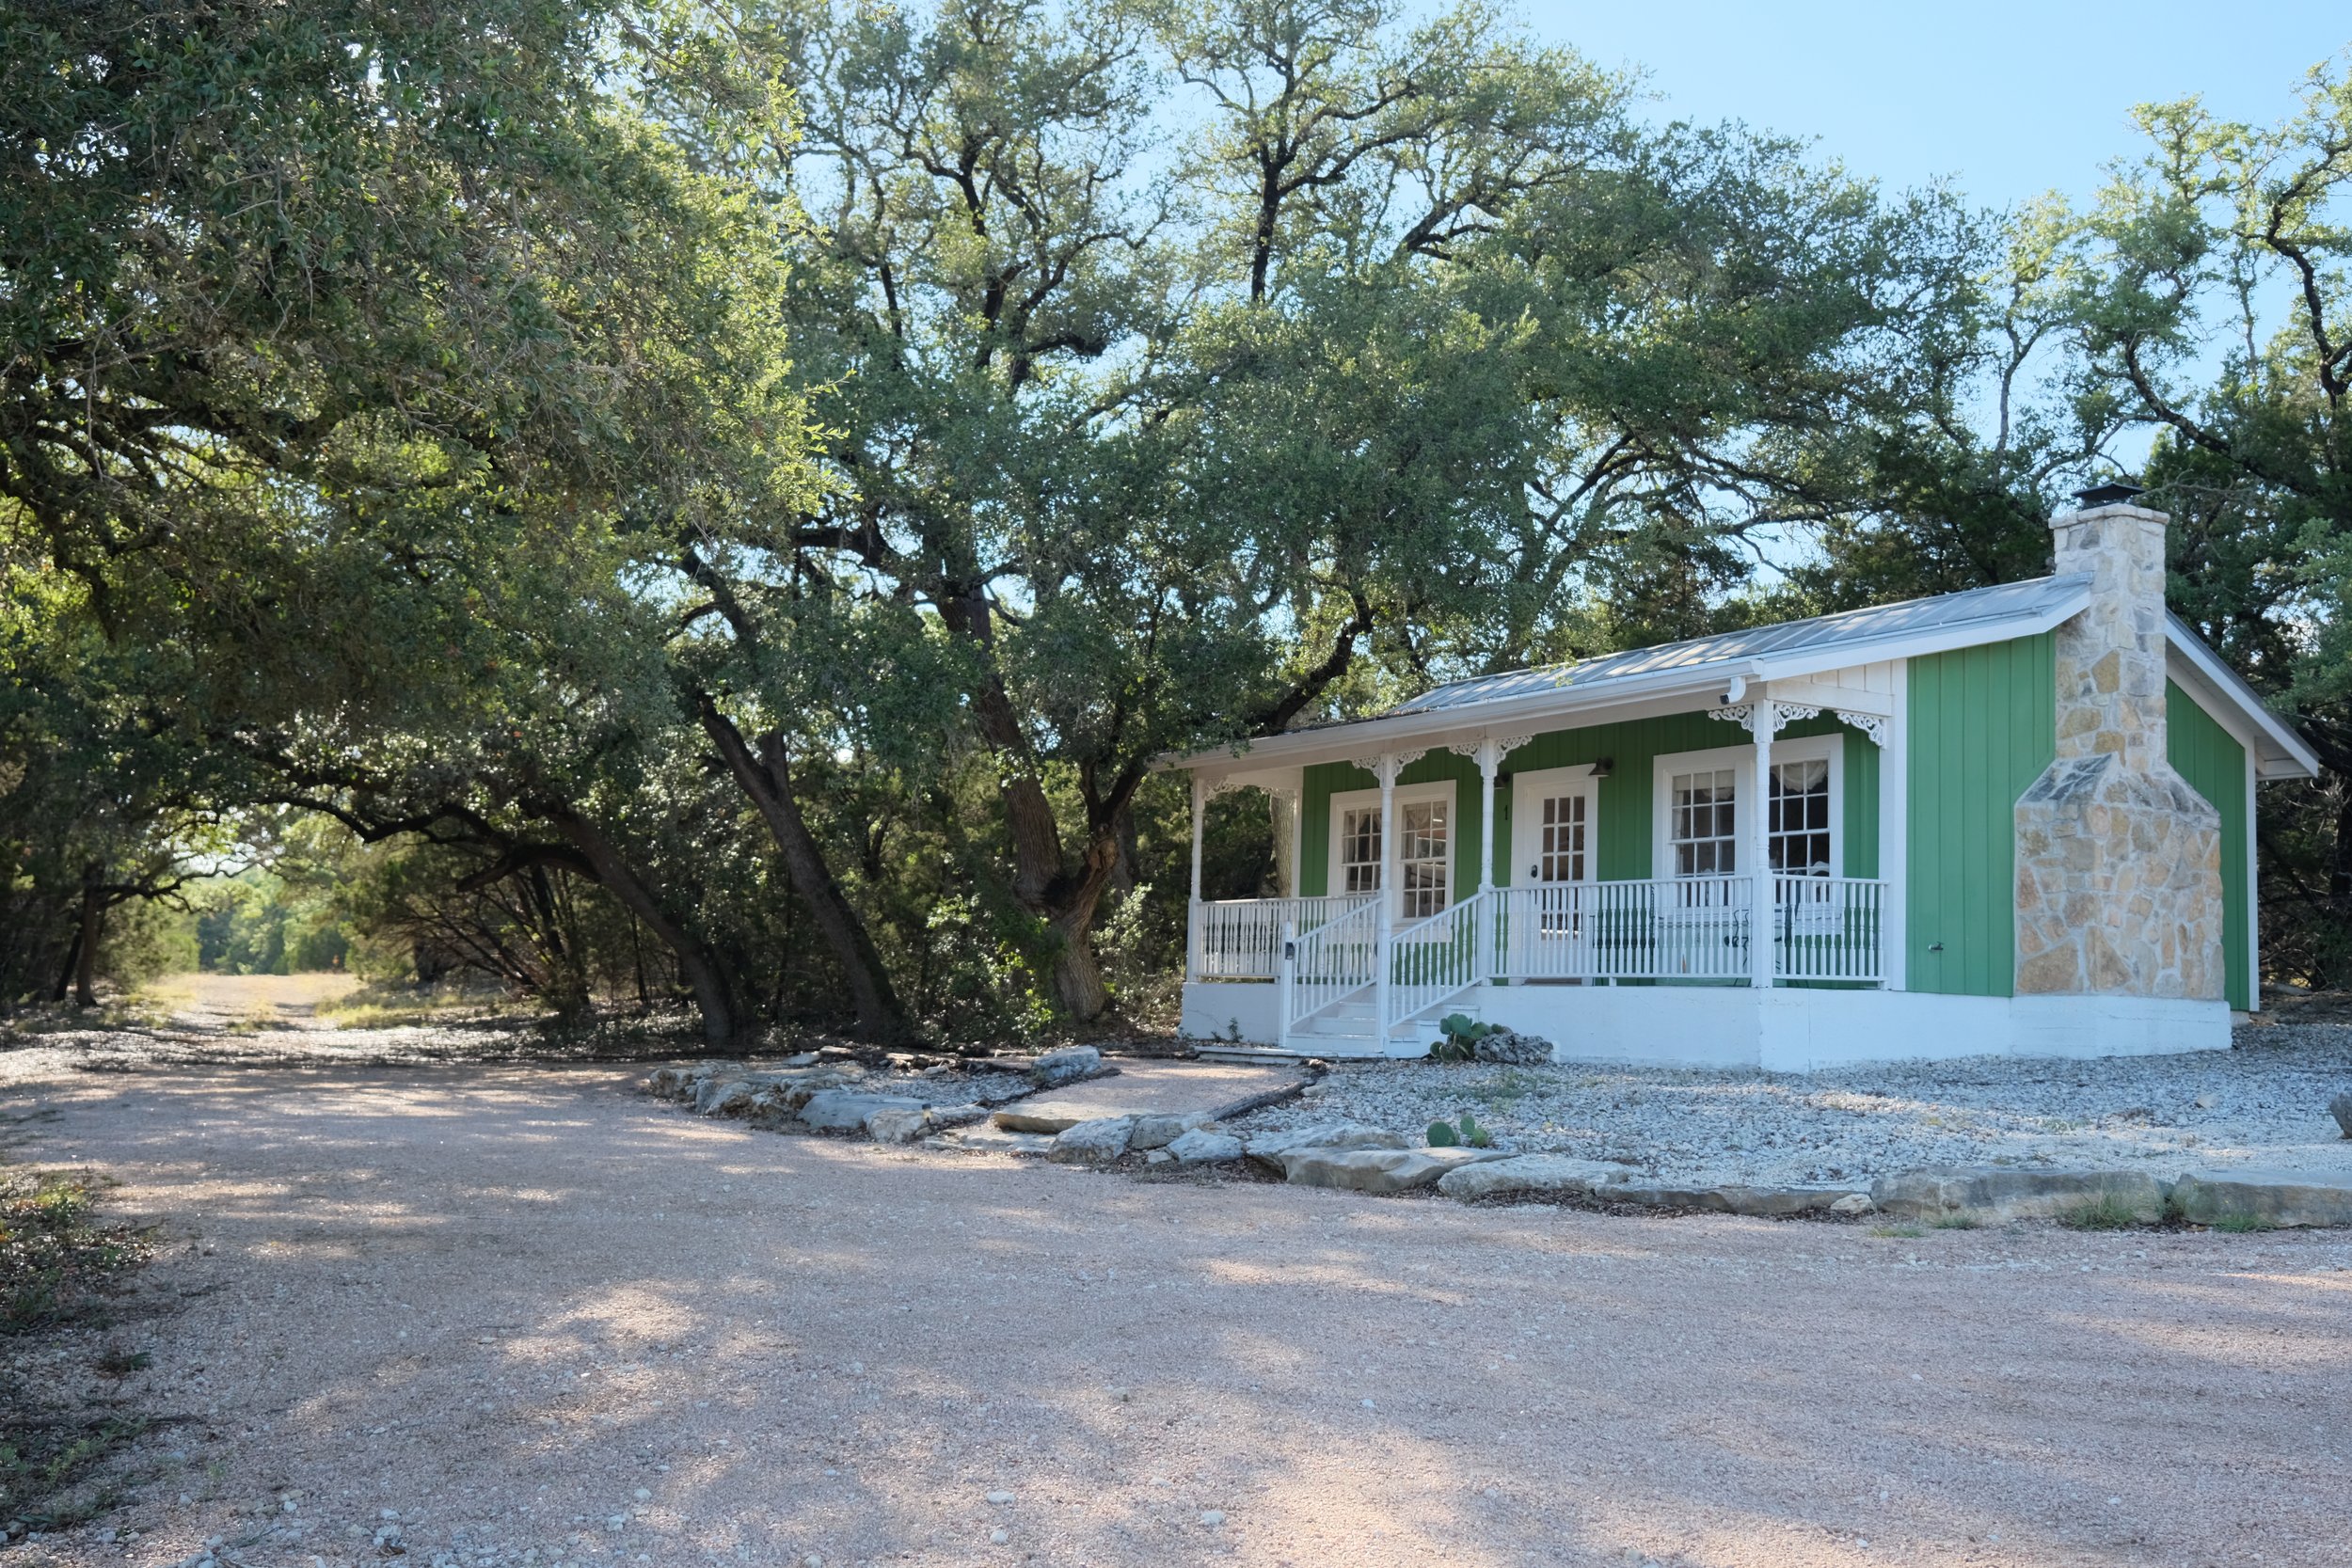 The Wimberley Square in the Heart of the Texas Hill Country